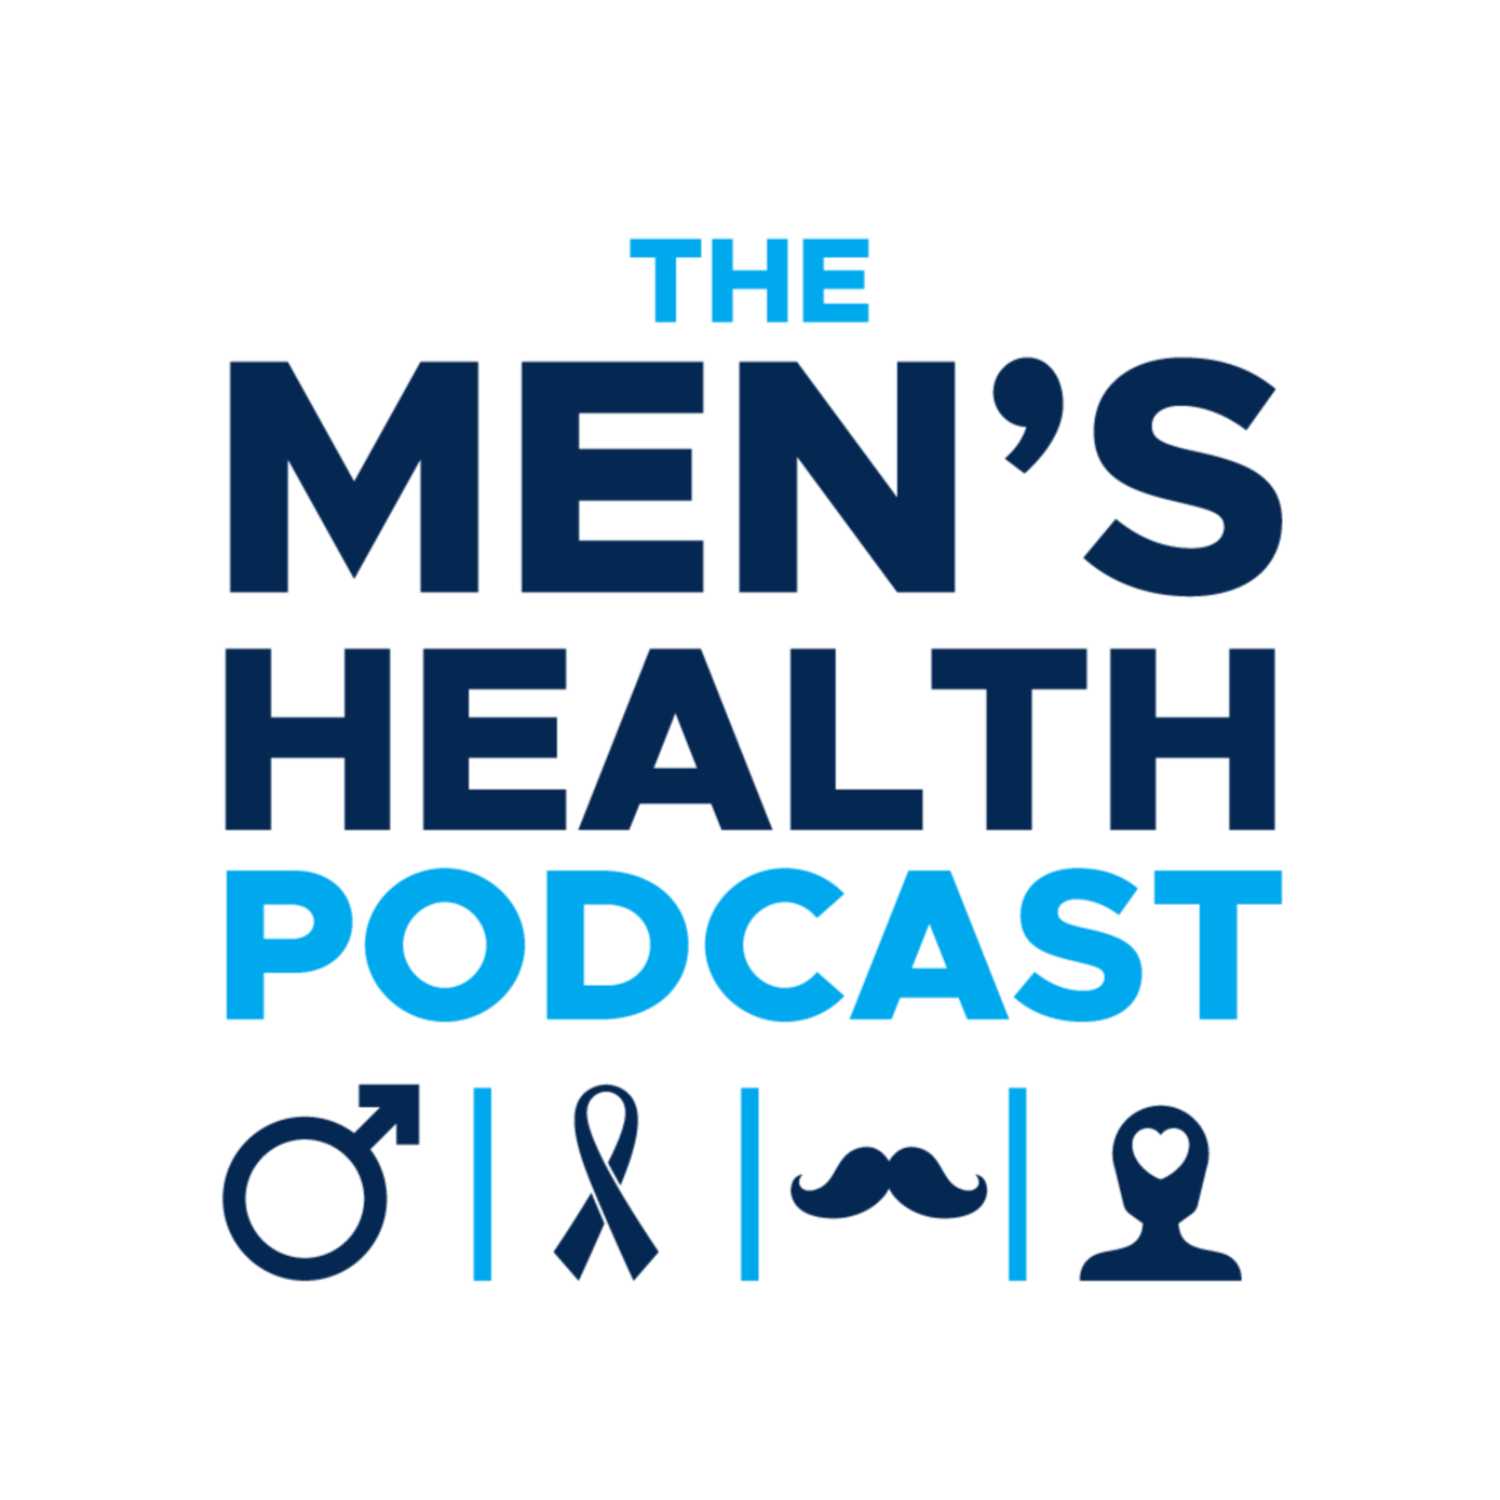 The Men's Health Podcast is coming soon...